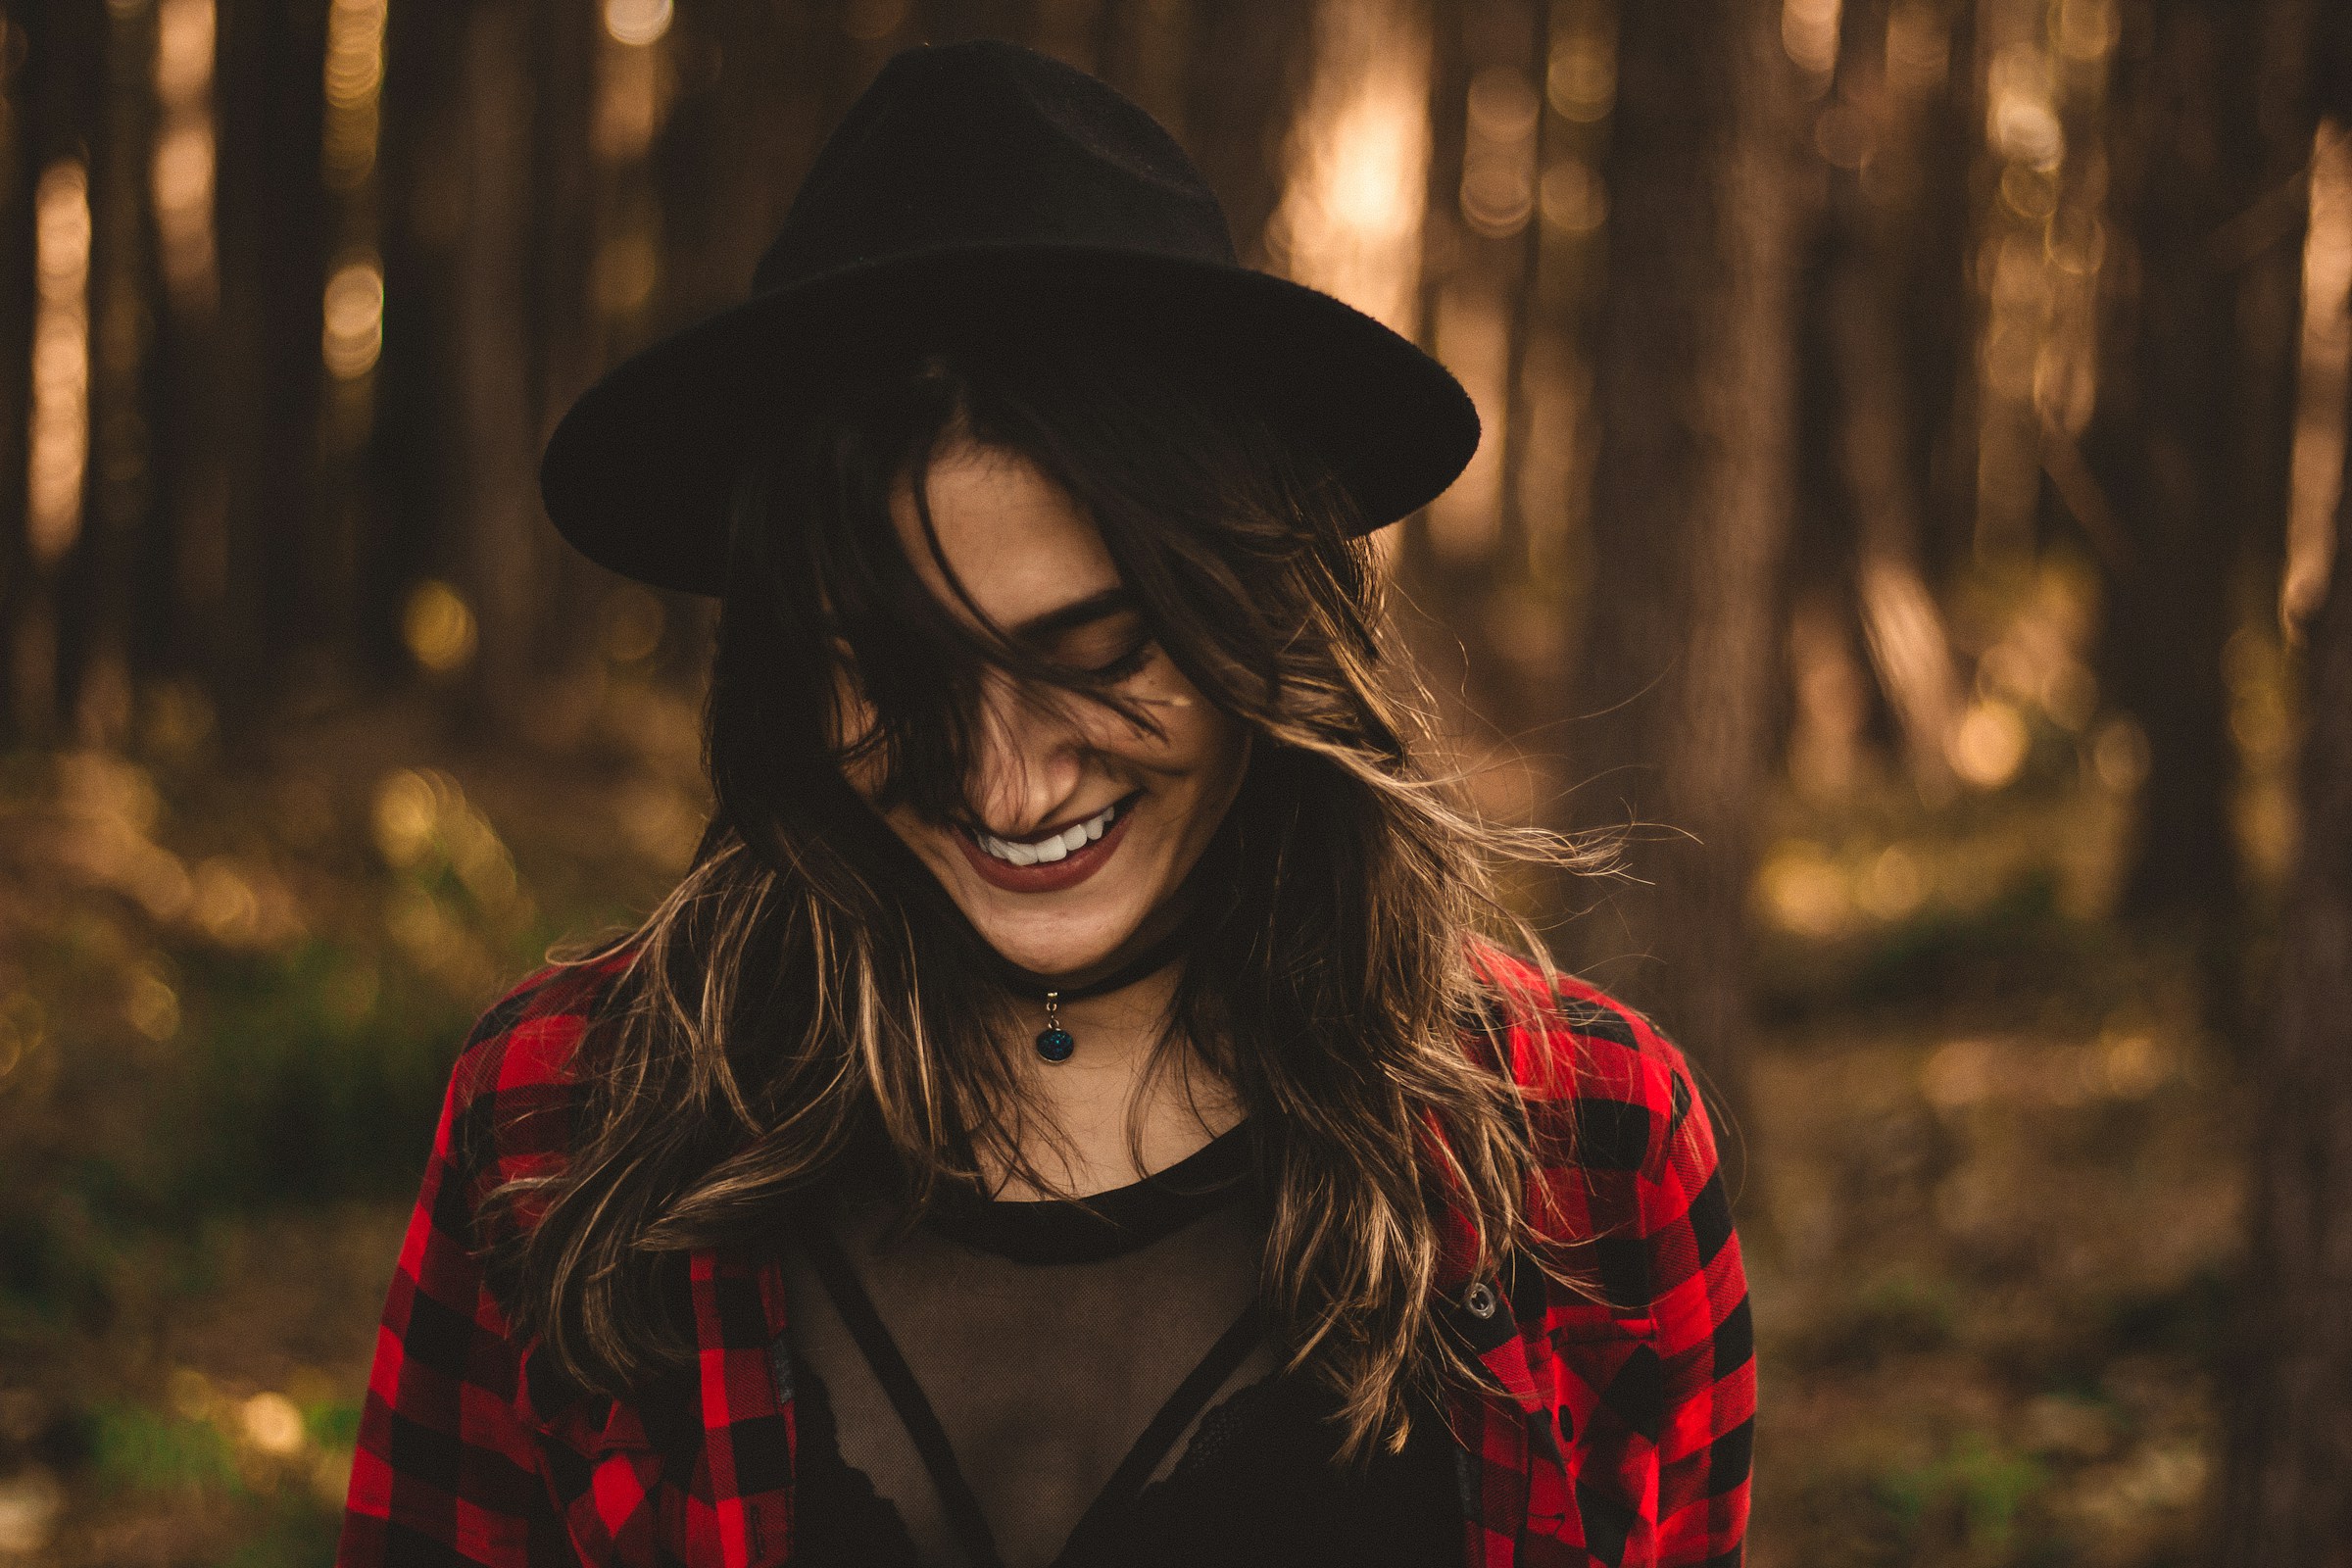 A woman smiling in the forest. | Source: Unsplash